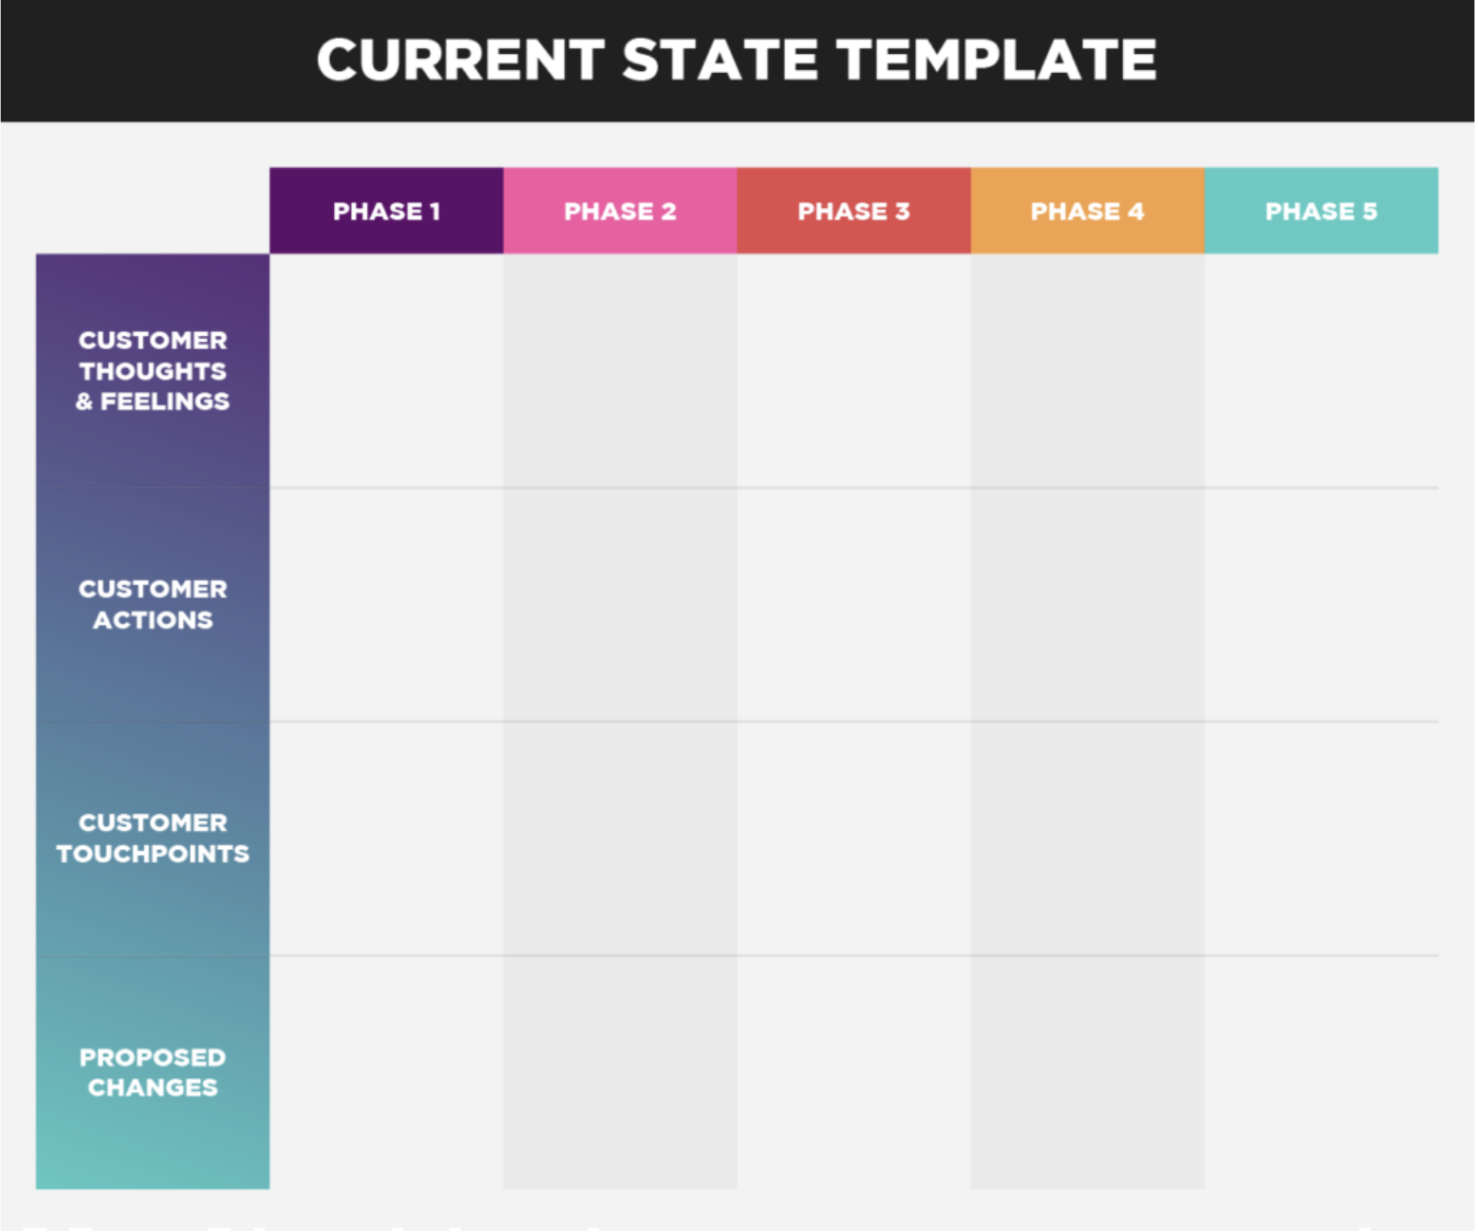 A blank template of a current state template, from Bright Vessel, a digital marketing agency and consultancy. The image shows boxes like customer actions and customer touchpoints.